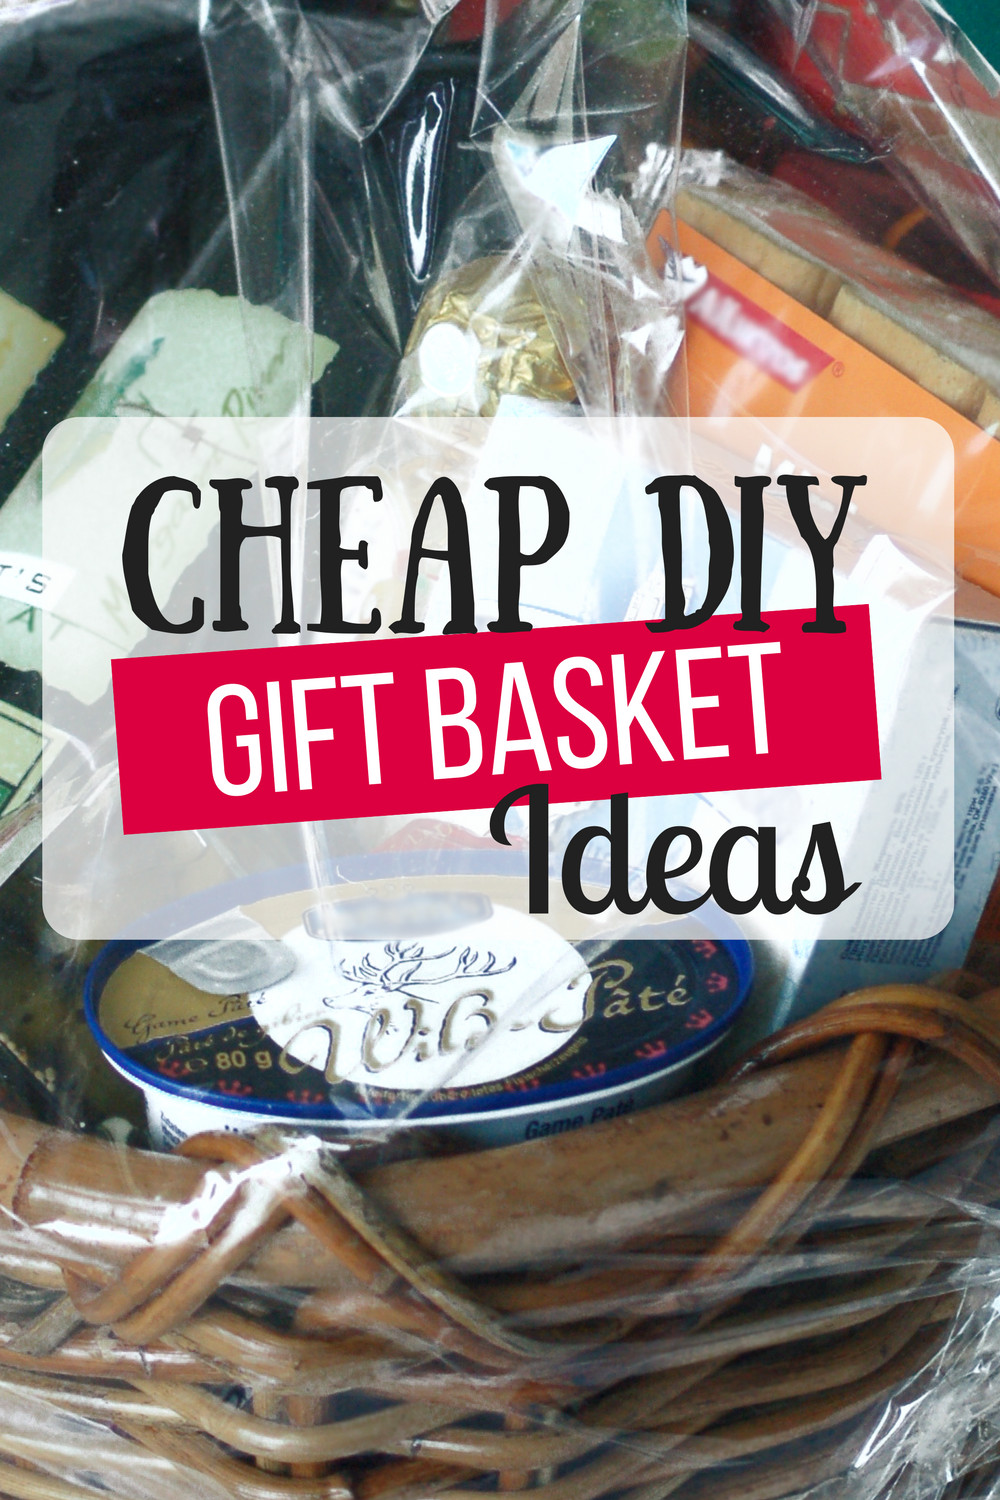 Gift Basket Ideas
 Cheap DIY Gift Baskets The Busy Bud er